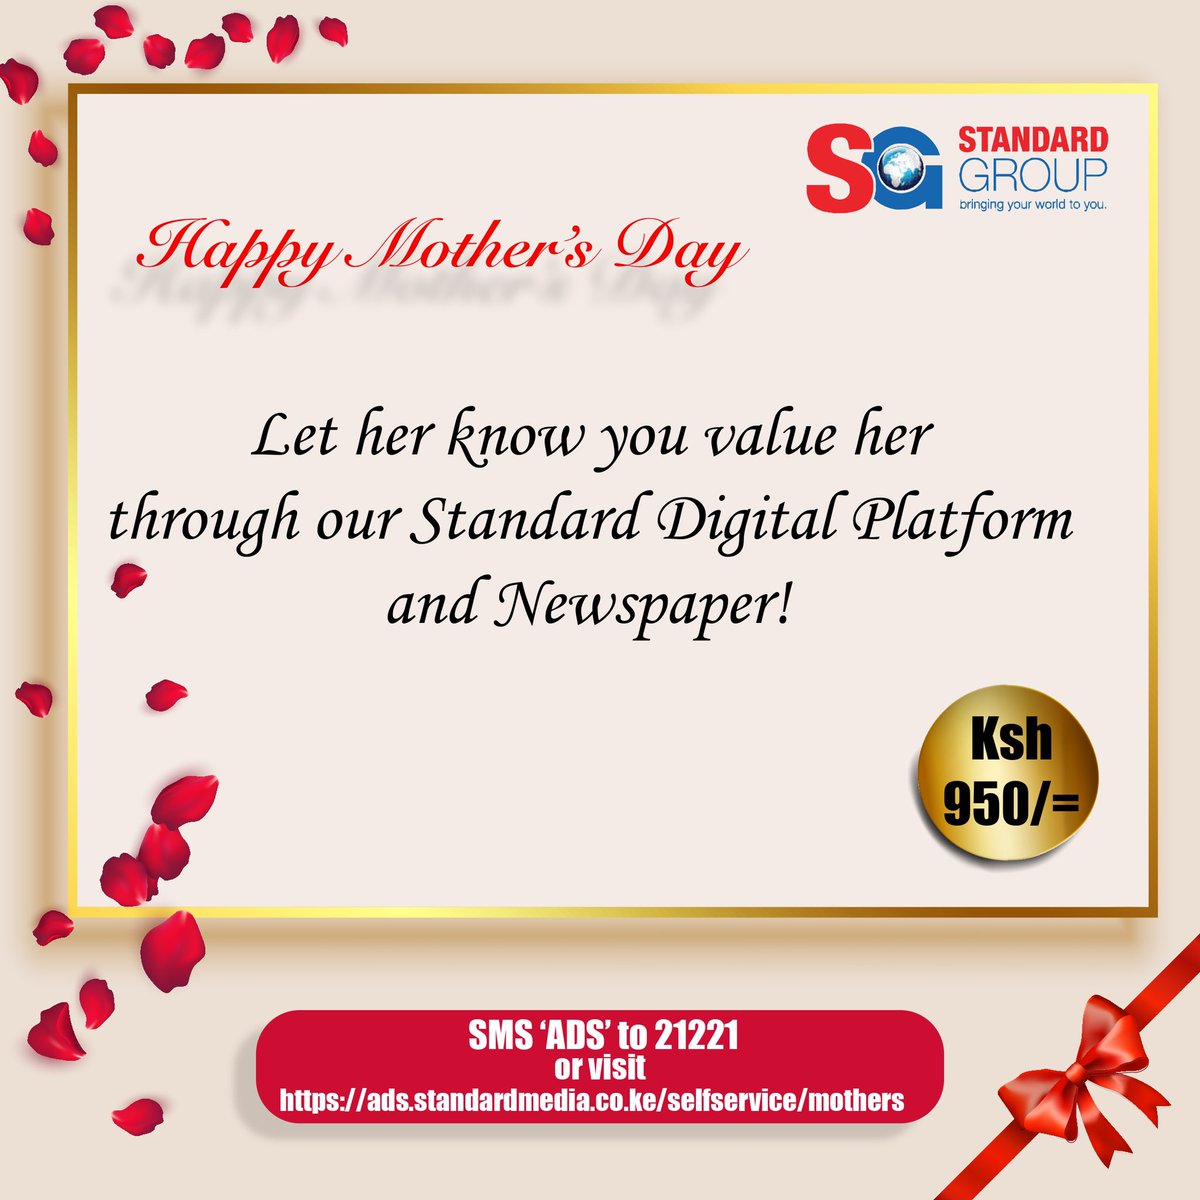 Make this #MothersDay one she'll always remember! Share your heartfelt tribute to Mom through our Standard Digital Platform and Newspaper for only Ksh 950! Let her know she's treasured. SMS ‘ads’ to 21221 or visit ads.standardmedia.co.ke/selfservice/mo… 📰